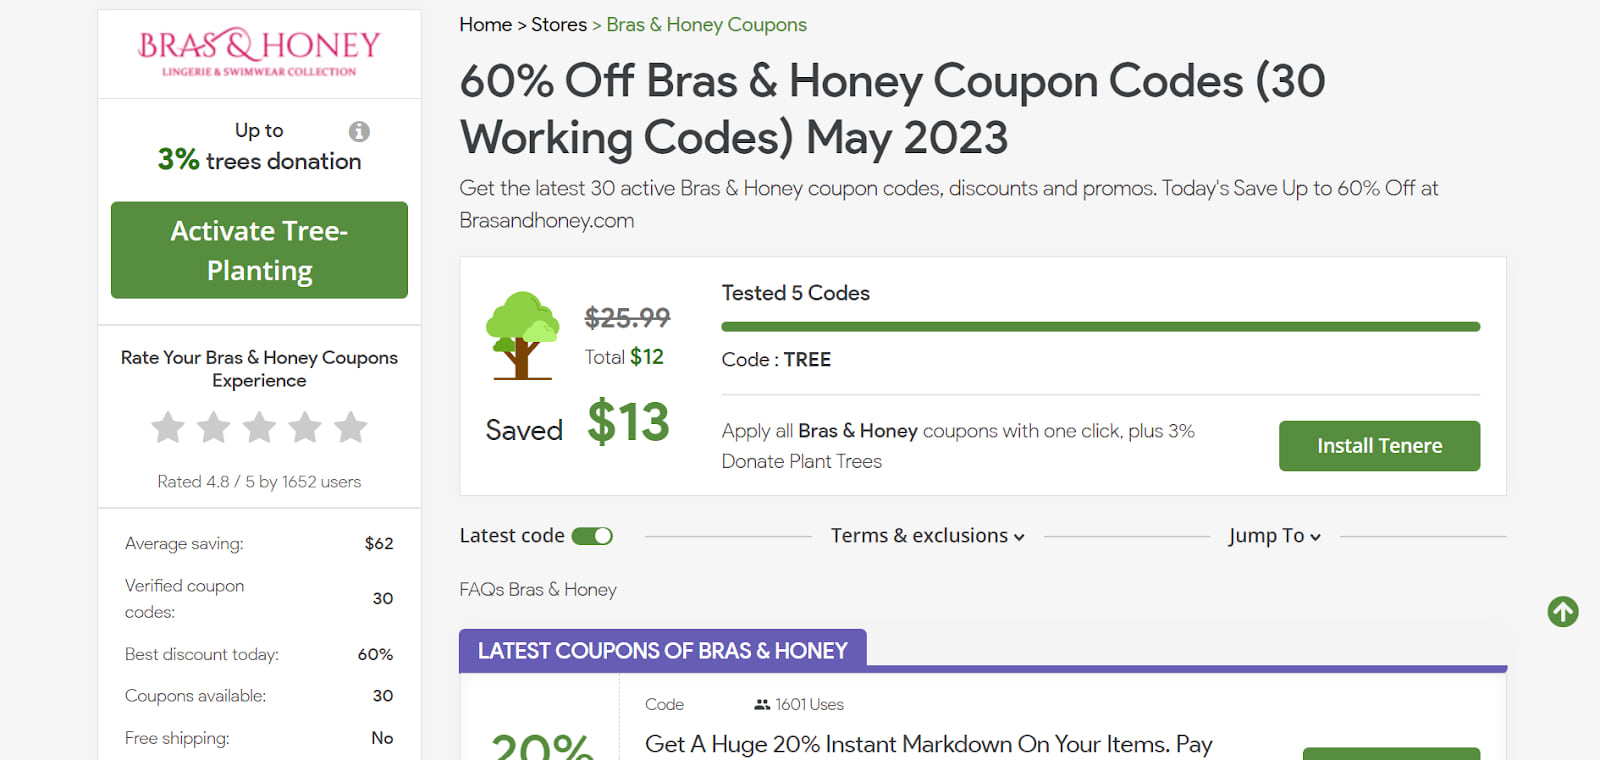 How To Use Bras & Honey Discount Code 3